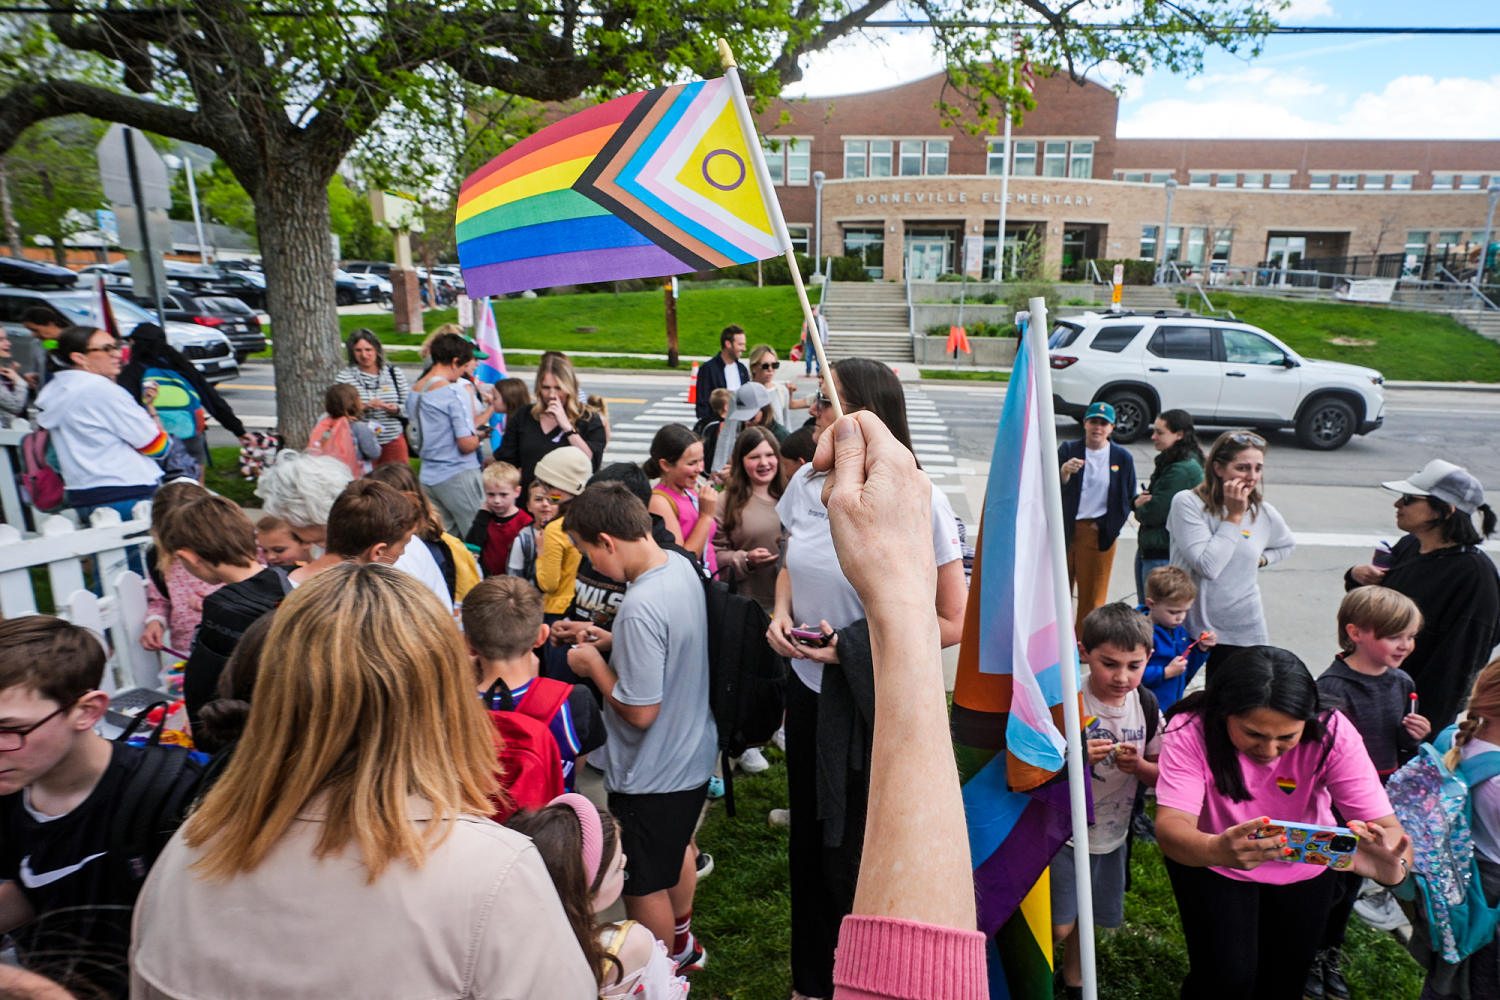 Rollout of transgender bathroom law sows confusion among Utah public school families